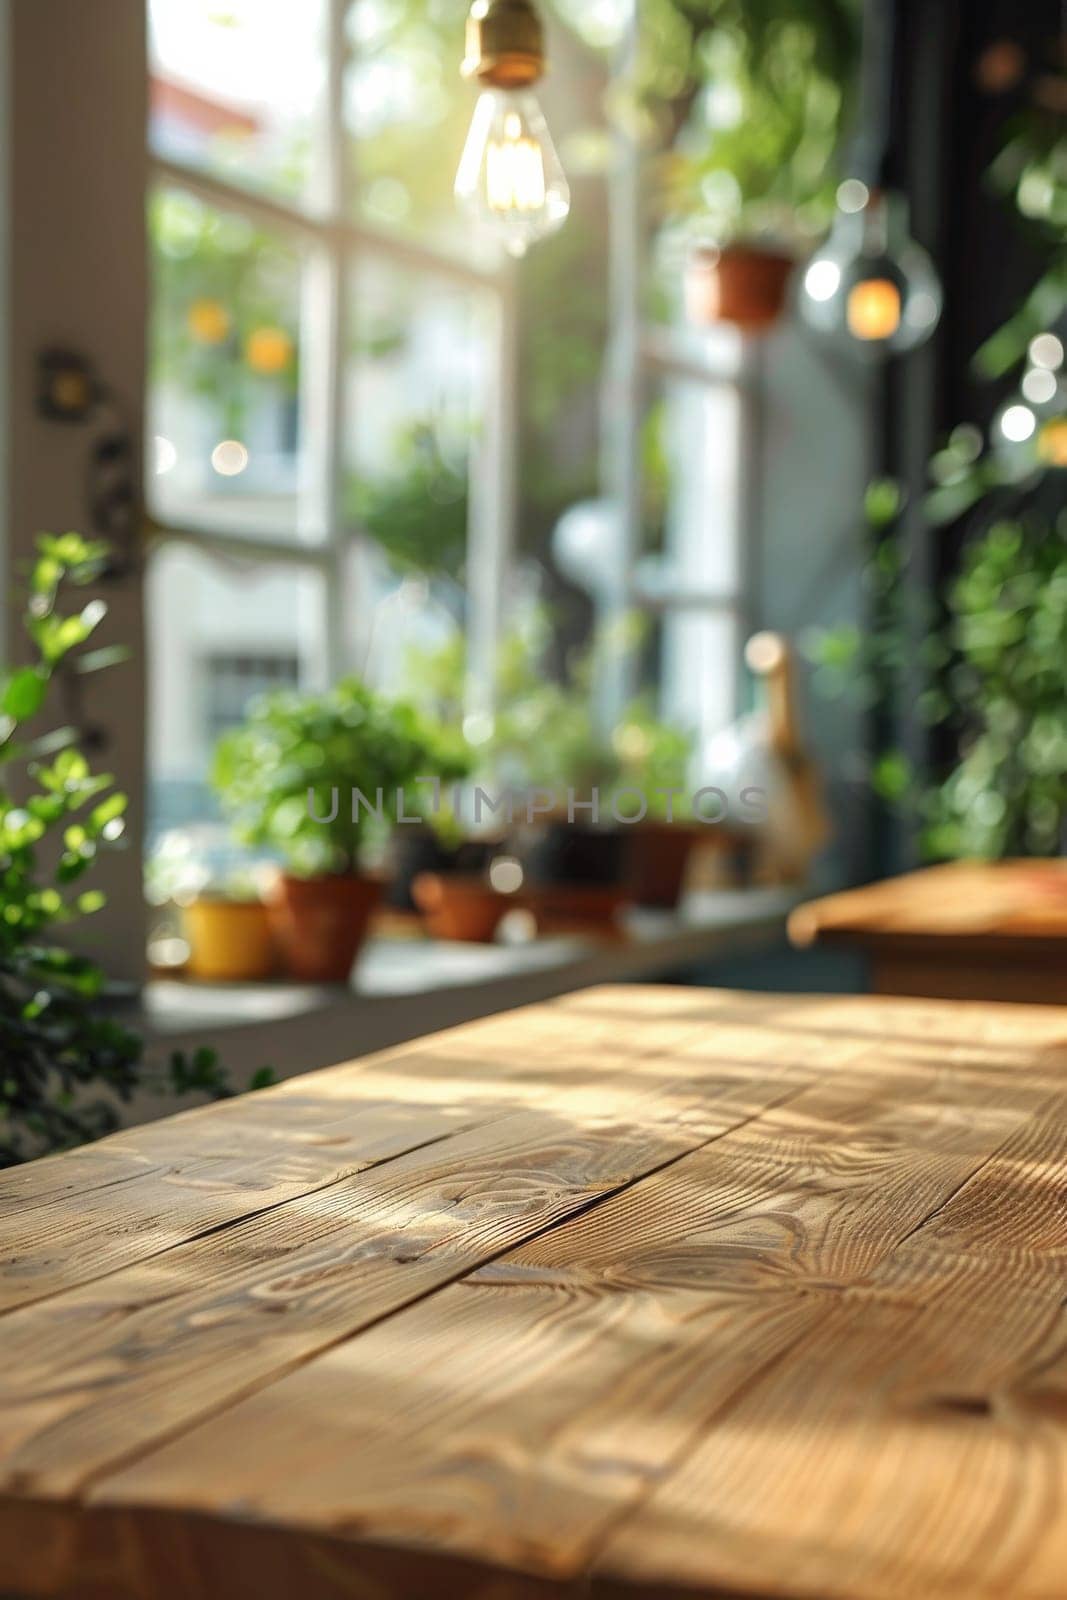 A wooden table with a view of a window and potted plants by itchaznong